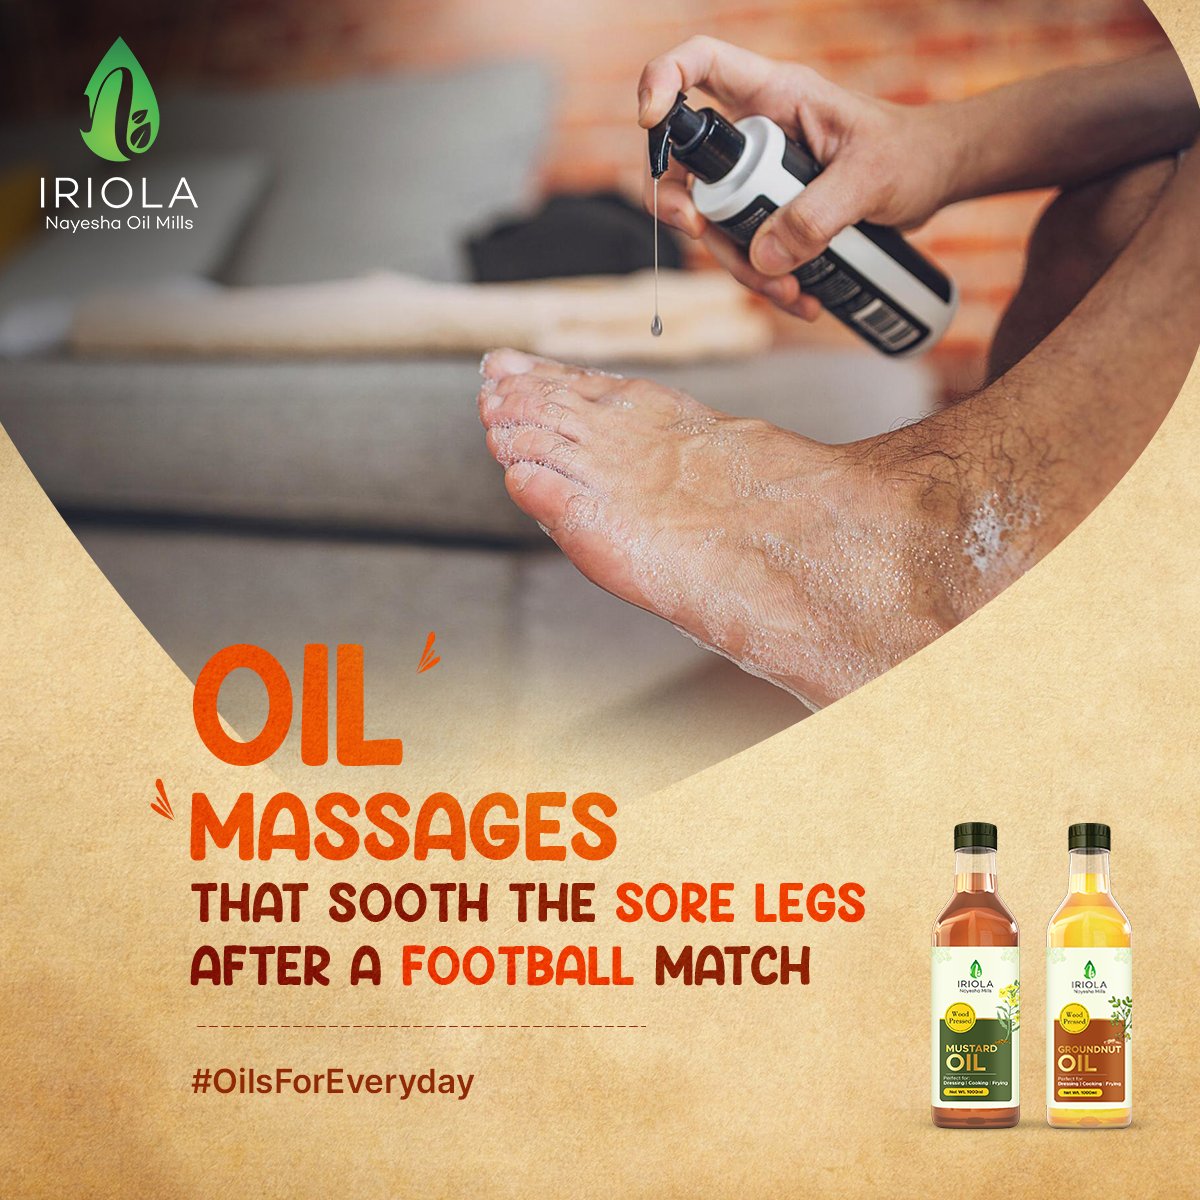 Our aftermatch activity was getting Papa’s scolding and soothing together with a mustard oil and balm massage over sore legs. 

#OilsForEveryday #MustardOilMagic #NaturalRemedies #PainRelief #HealthyHabits #Iriola #NayeshaOilMills